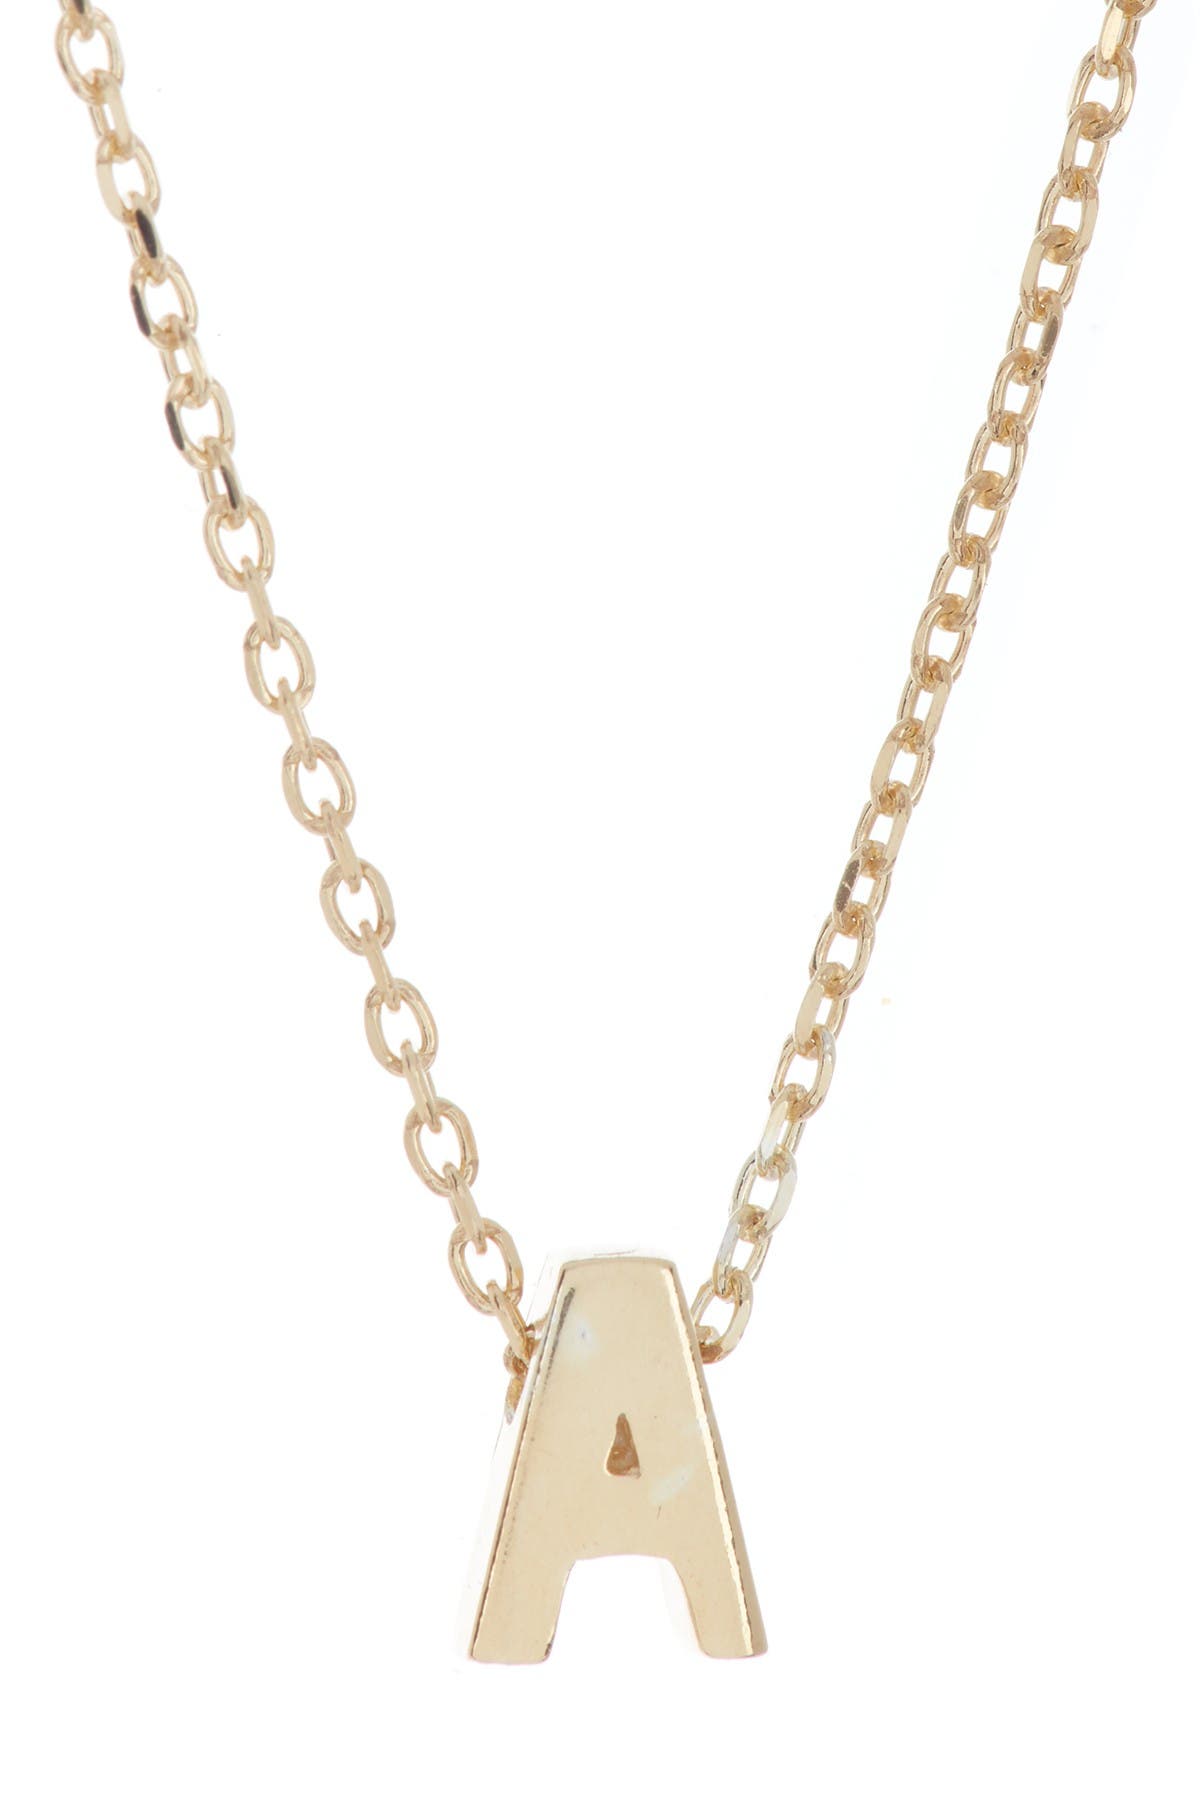 ADORNIA 14K GOLD PLATED INITIAL PENDANT NECKLACE,791109049235